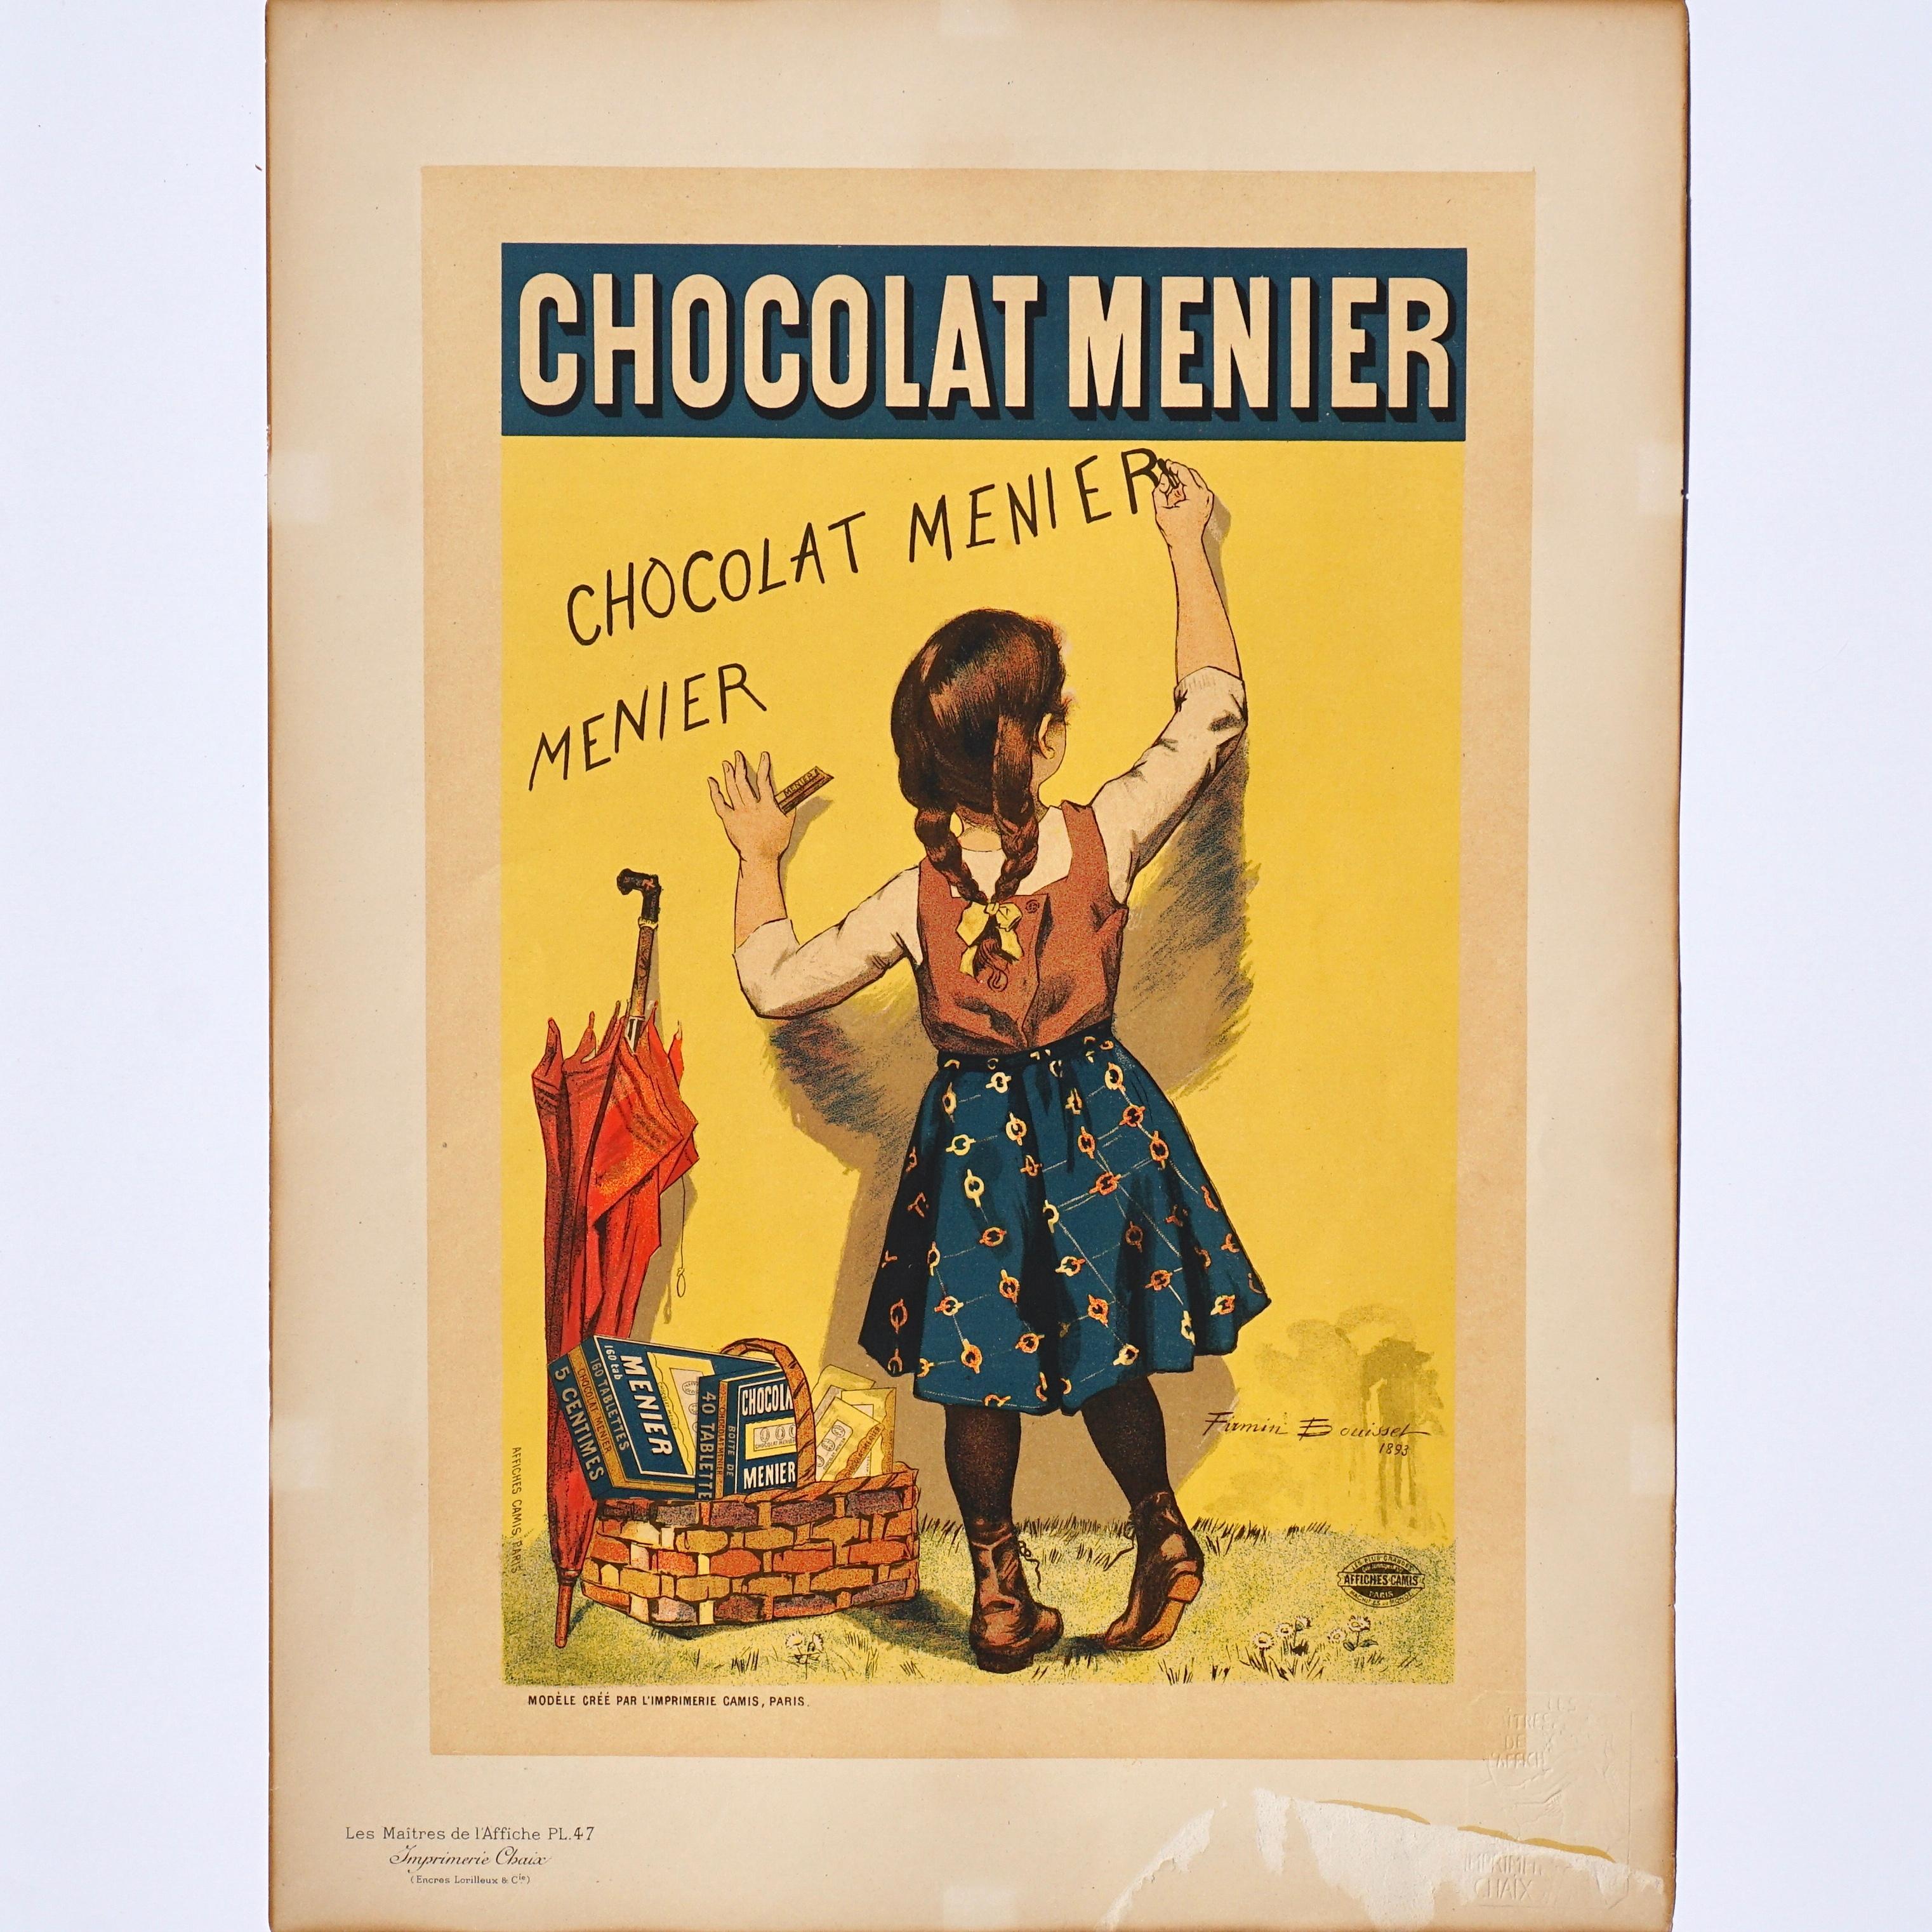 Artist: Firmin Bouisset French (1859-1925)
Title: Chocolat Menier
Original stone Lithograph on vélin paper 1895
Size : 15.75 x 11.5 in. / 39,5 x 29 cm
Framed: 17 X 12.75 inches
Printed by : Chaix 1895

In good condition (B) crisp colors, There is